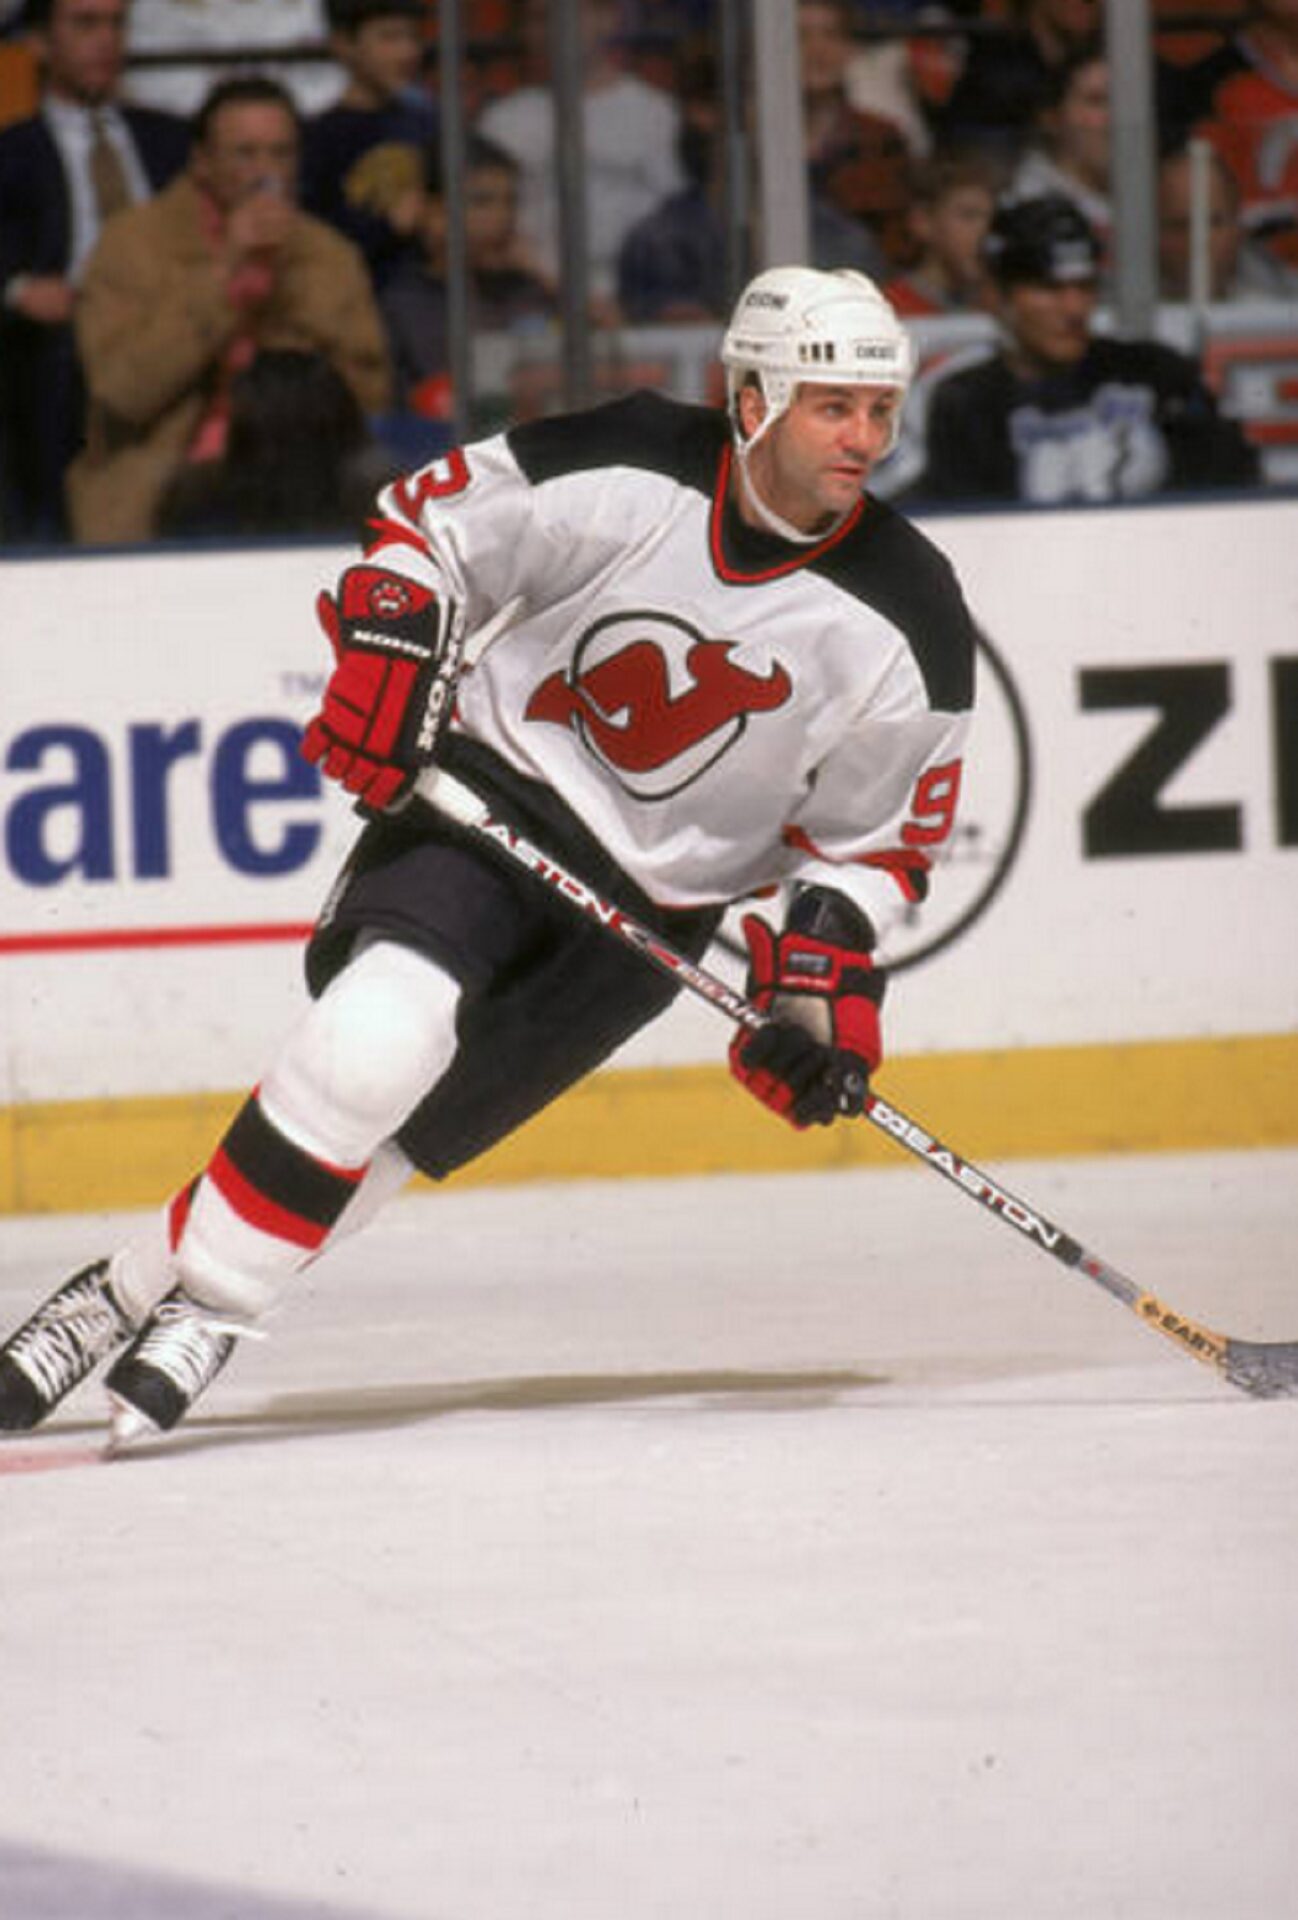 This Day In Hockey History-February 25, 1997- (Video) Gilmour Traded to NJ Devils